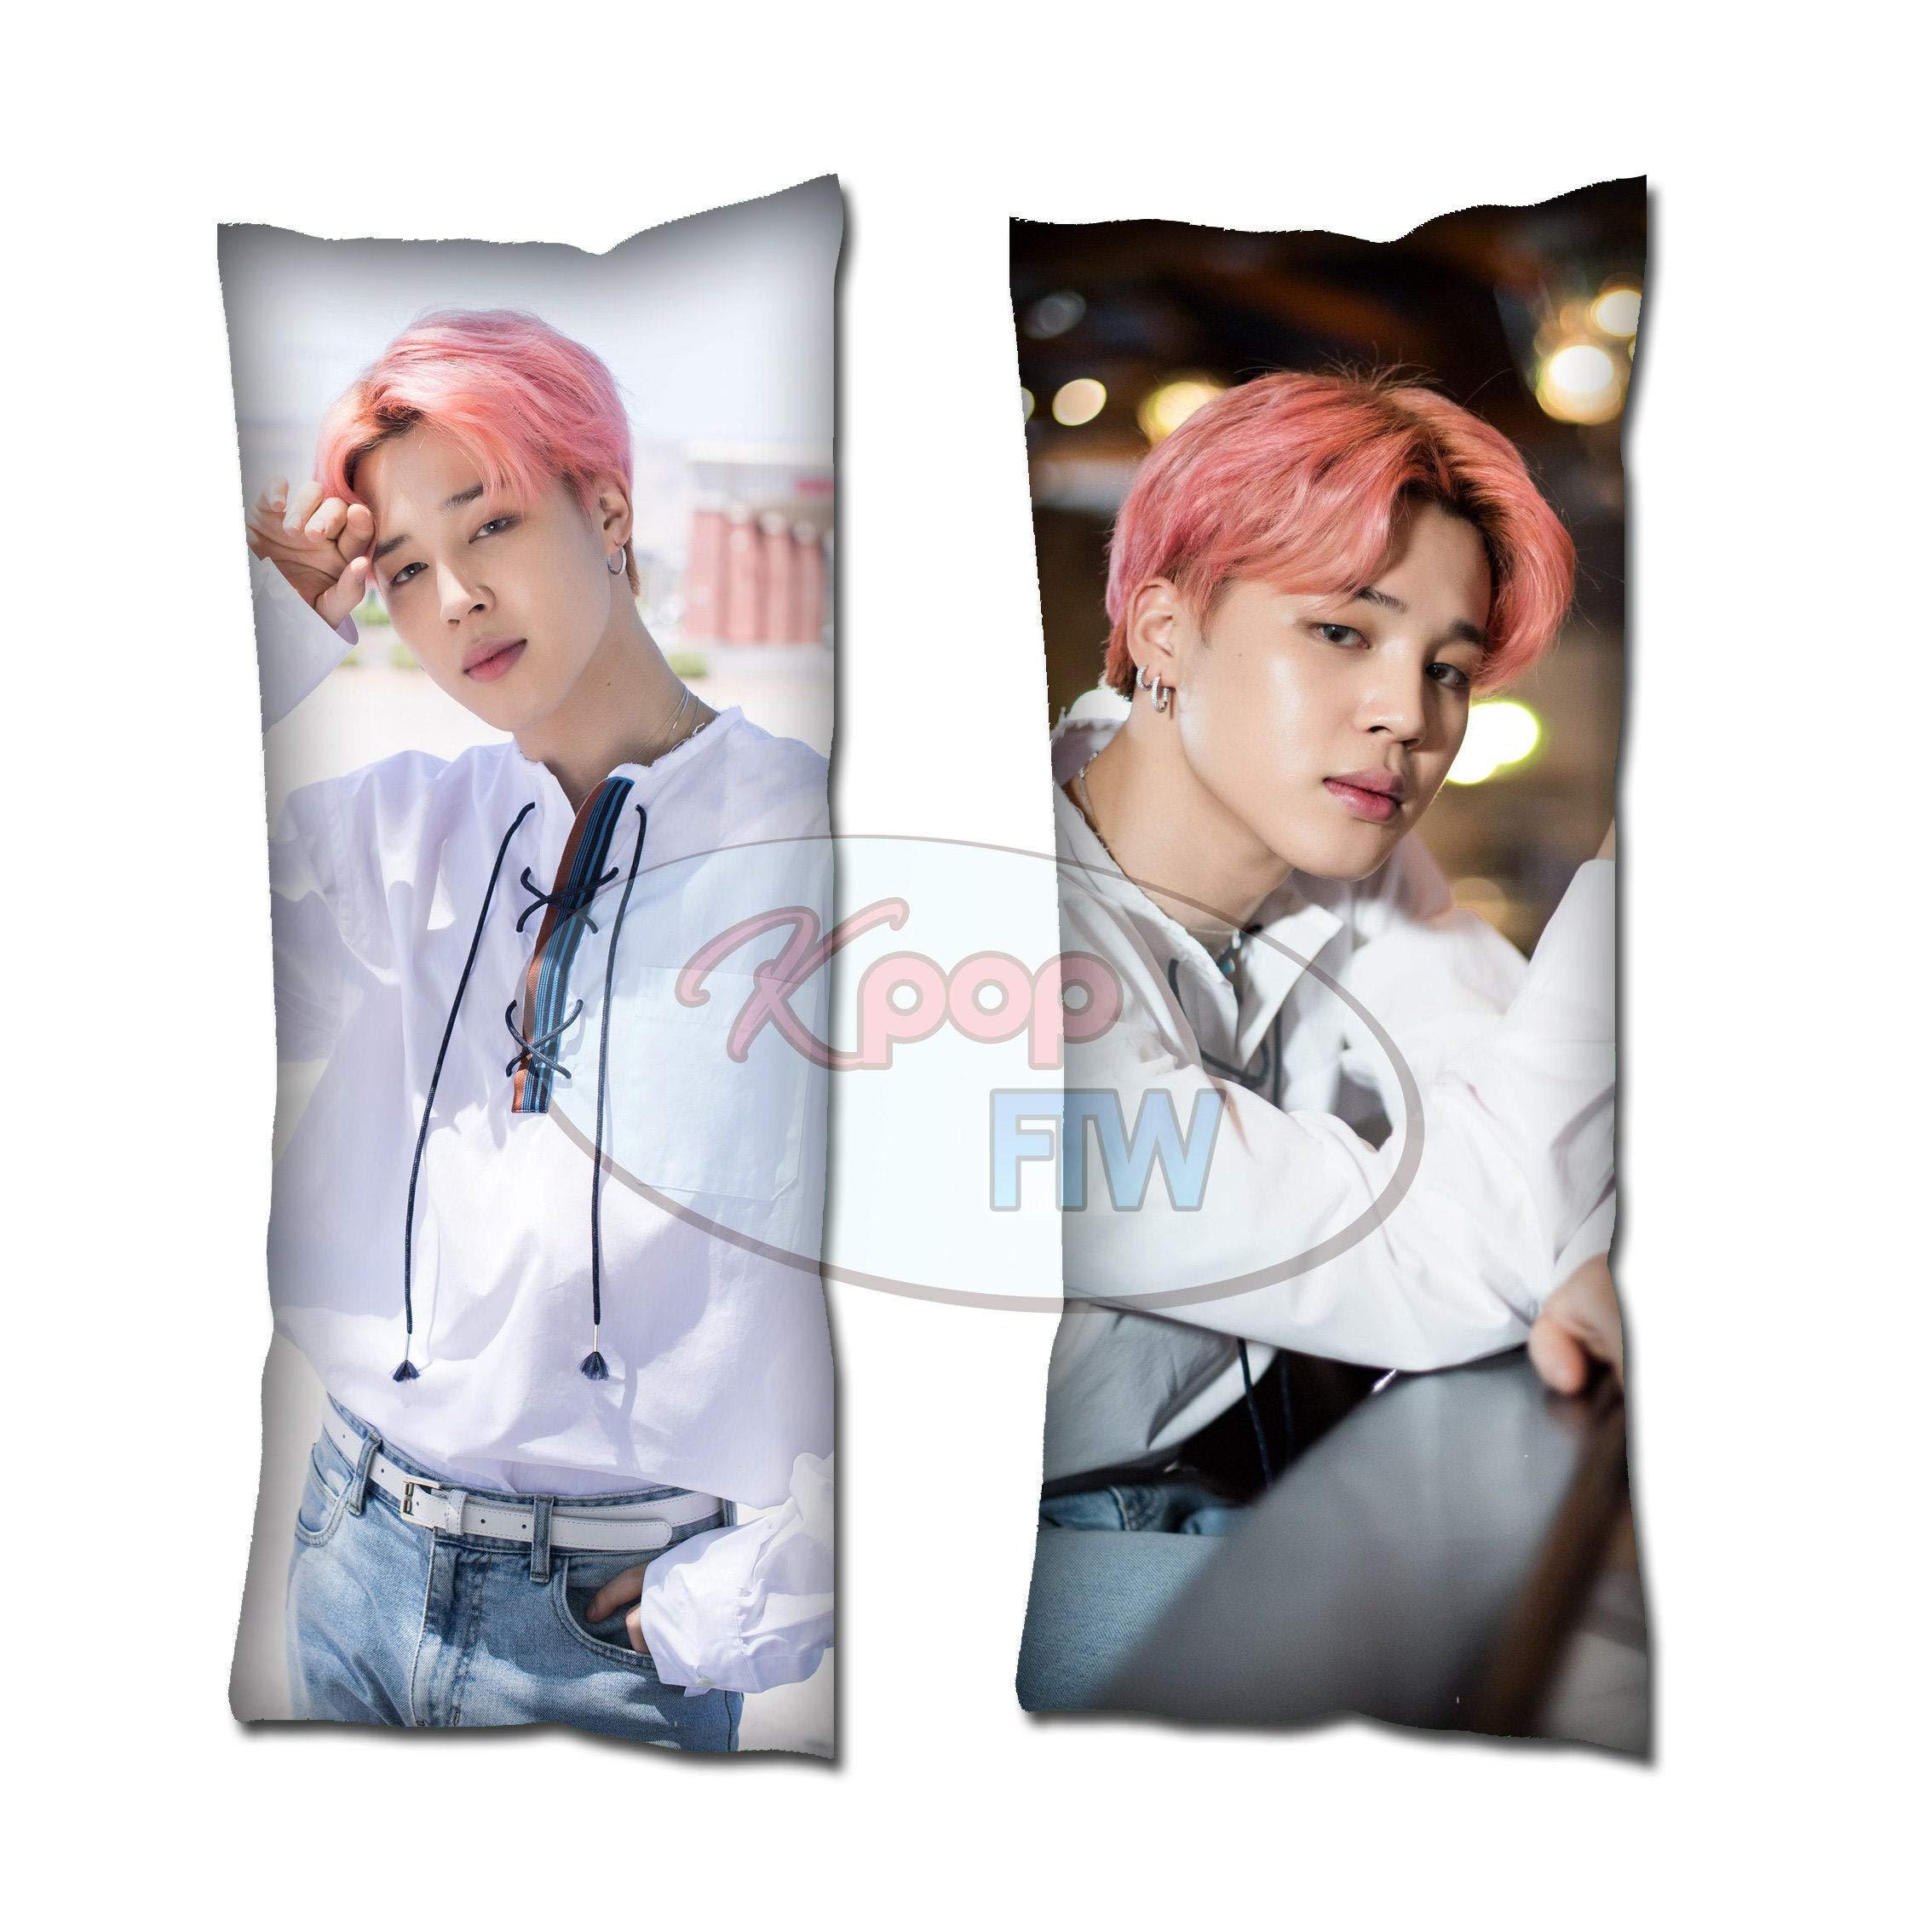 Cosplay-FTW Kpop BTS in LA 2019 Jimin Body Pillow Style 2 Peach Skin Cotton Polyester Blend 40cm x 100cm (Set of 1, CASE ONLY)